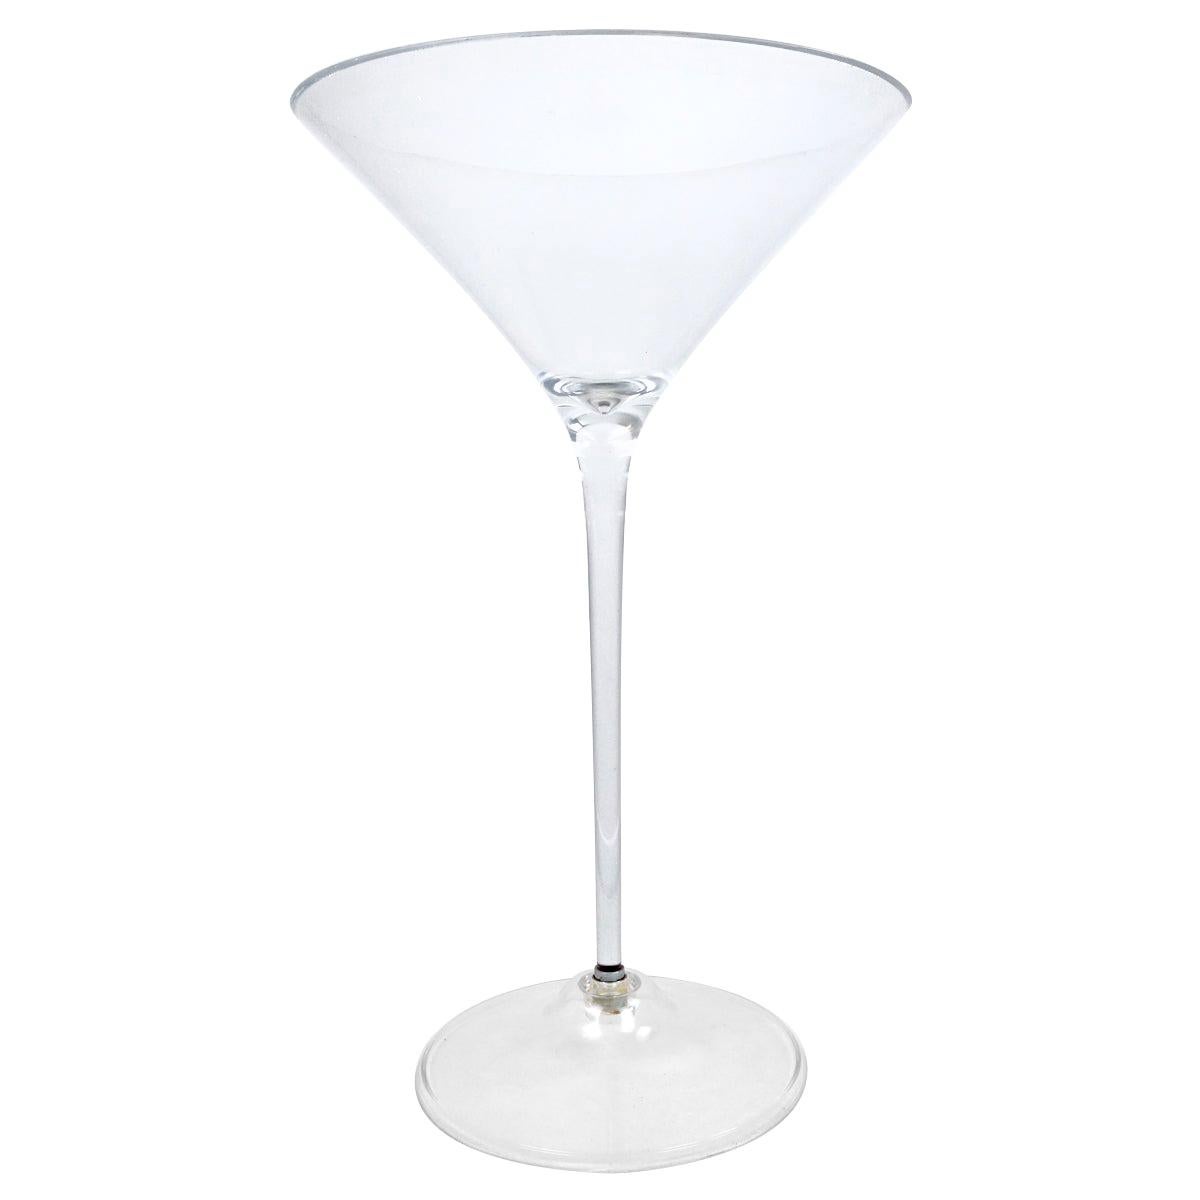 Larger Than Life Mid-Century Modern Cocktail Glass Made of Plexiglass